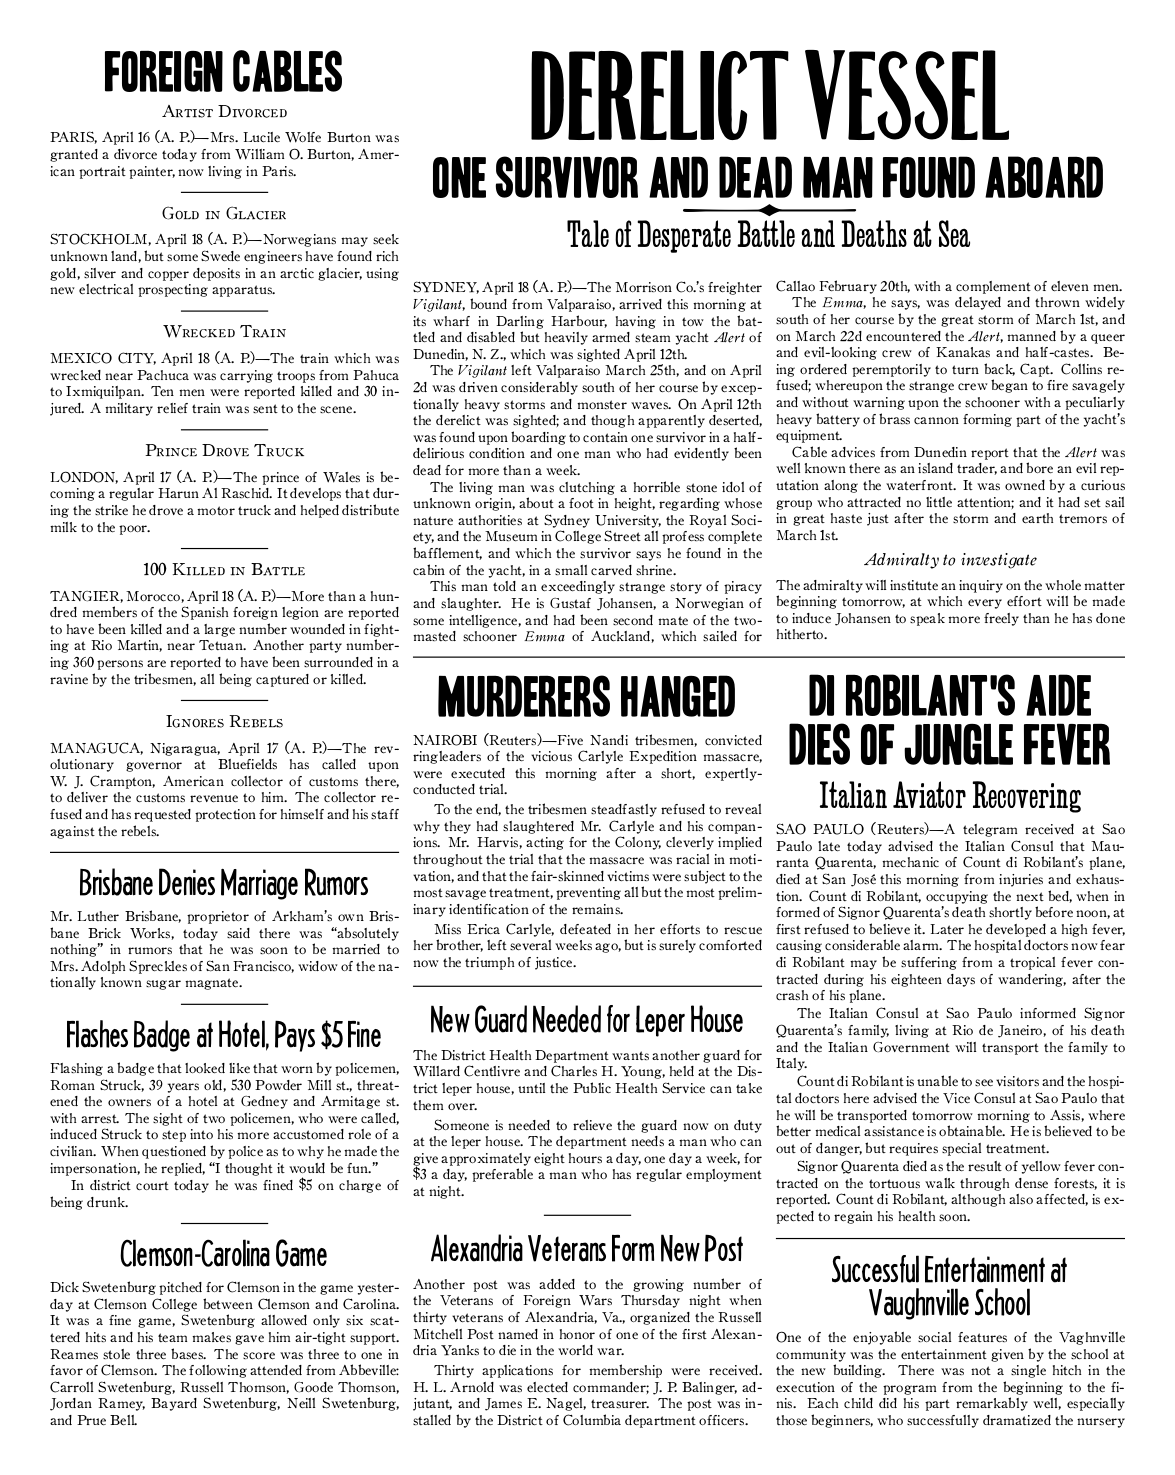 newspaper-2colspread.png